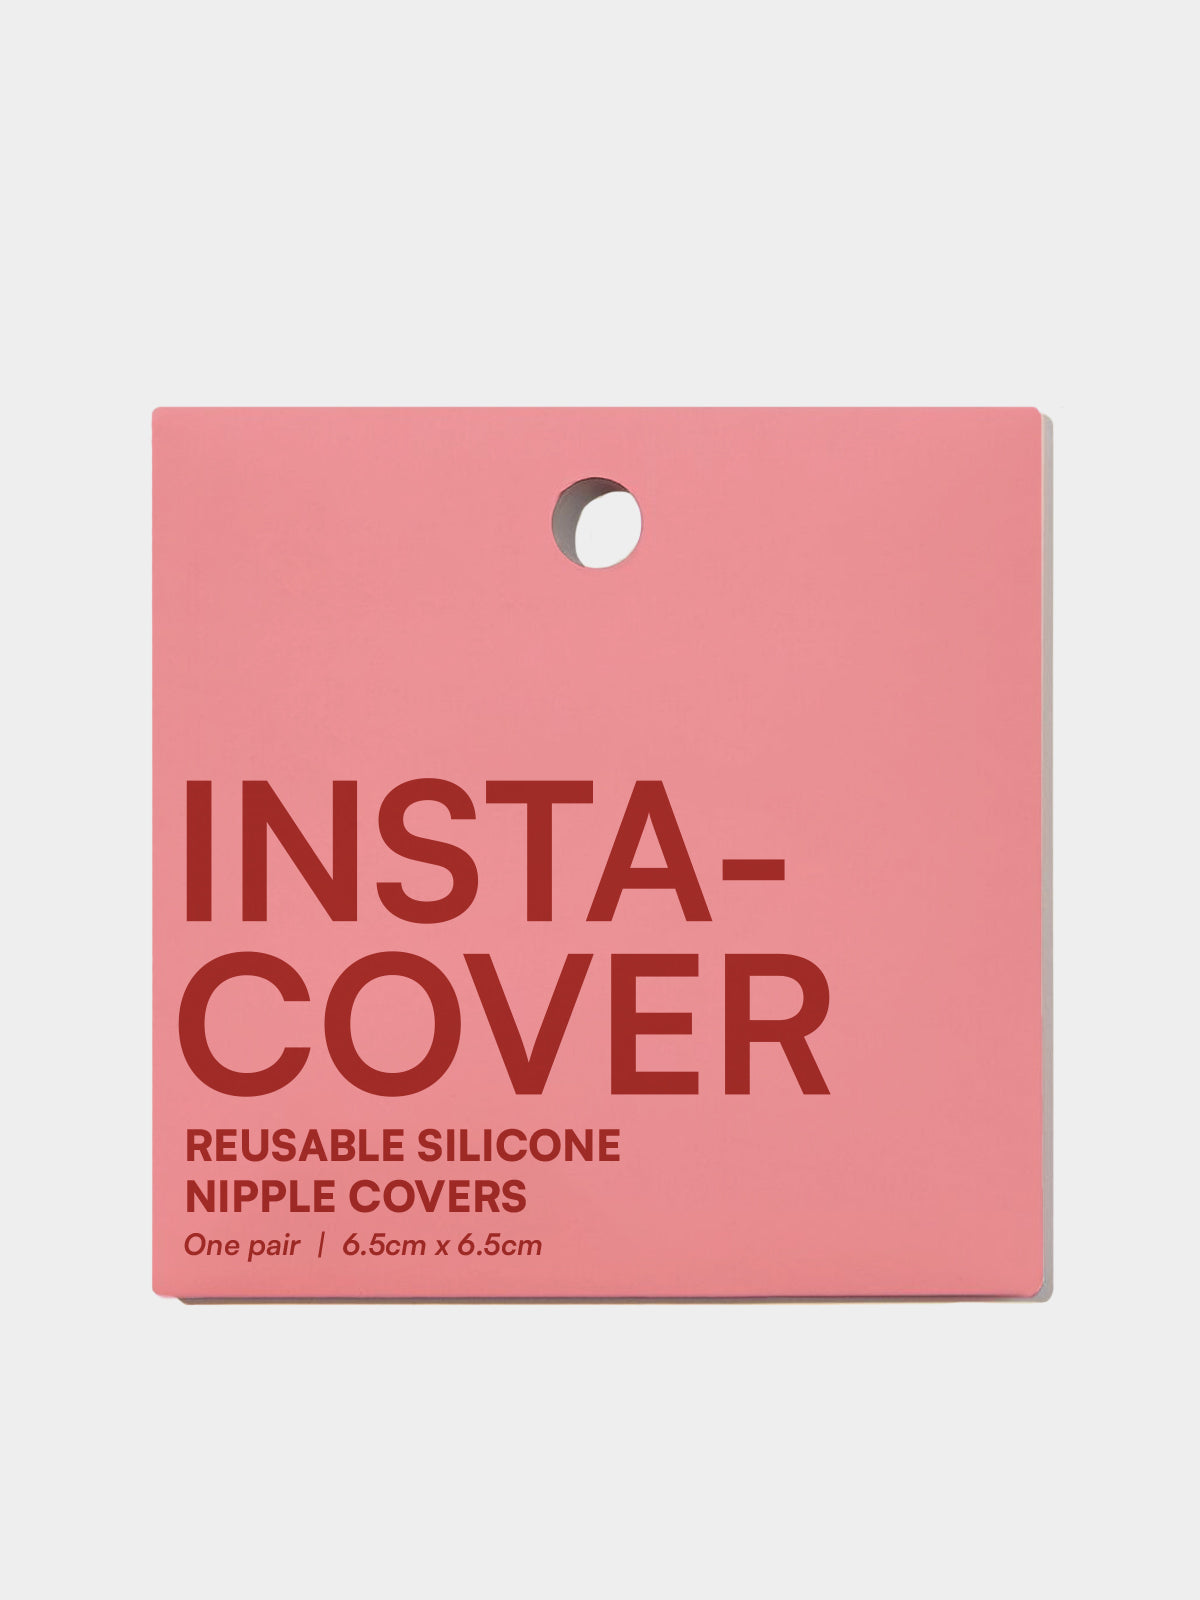 Insta-Cover Reusable Silicone Nipple Covers in Nude - Glue Store